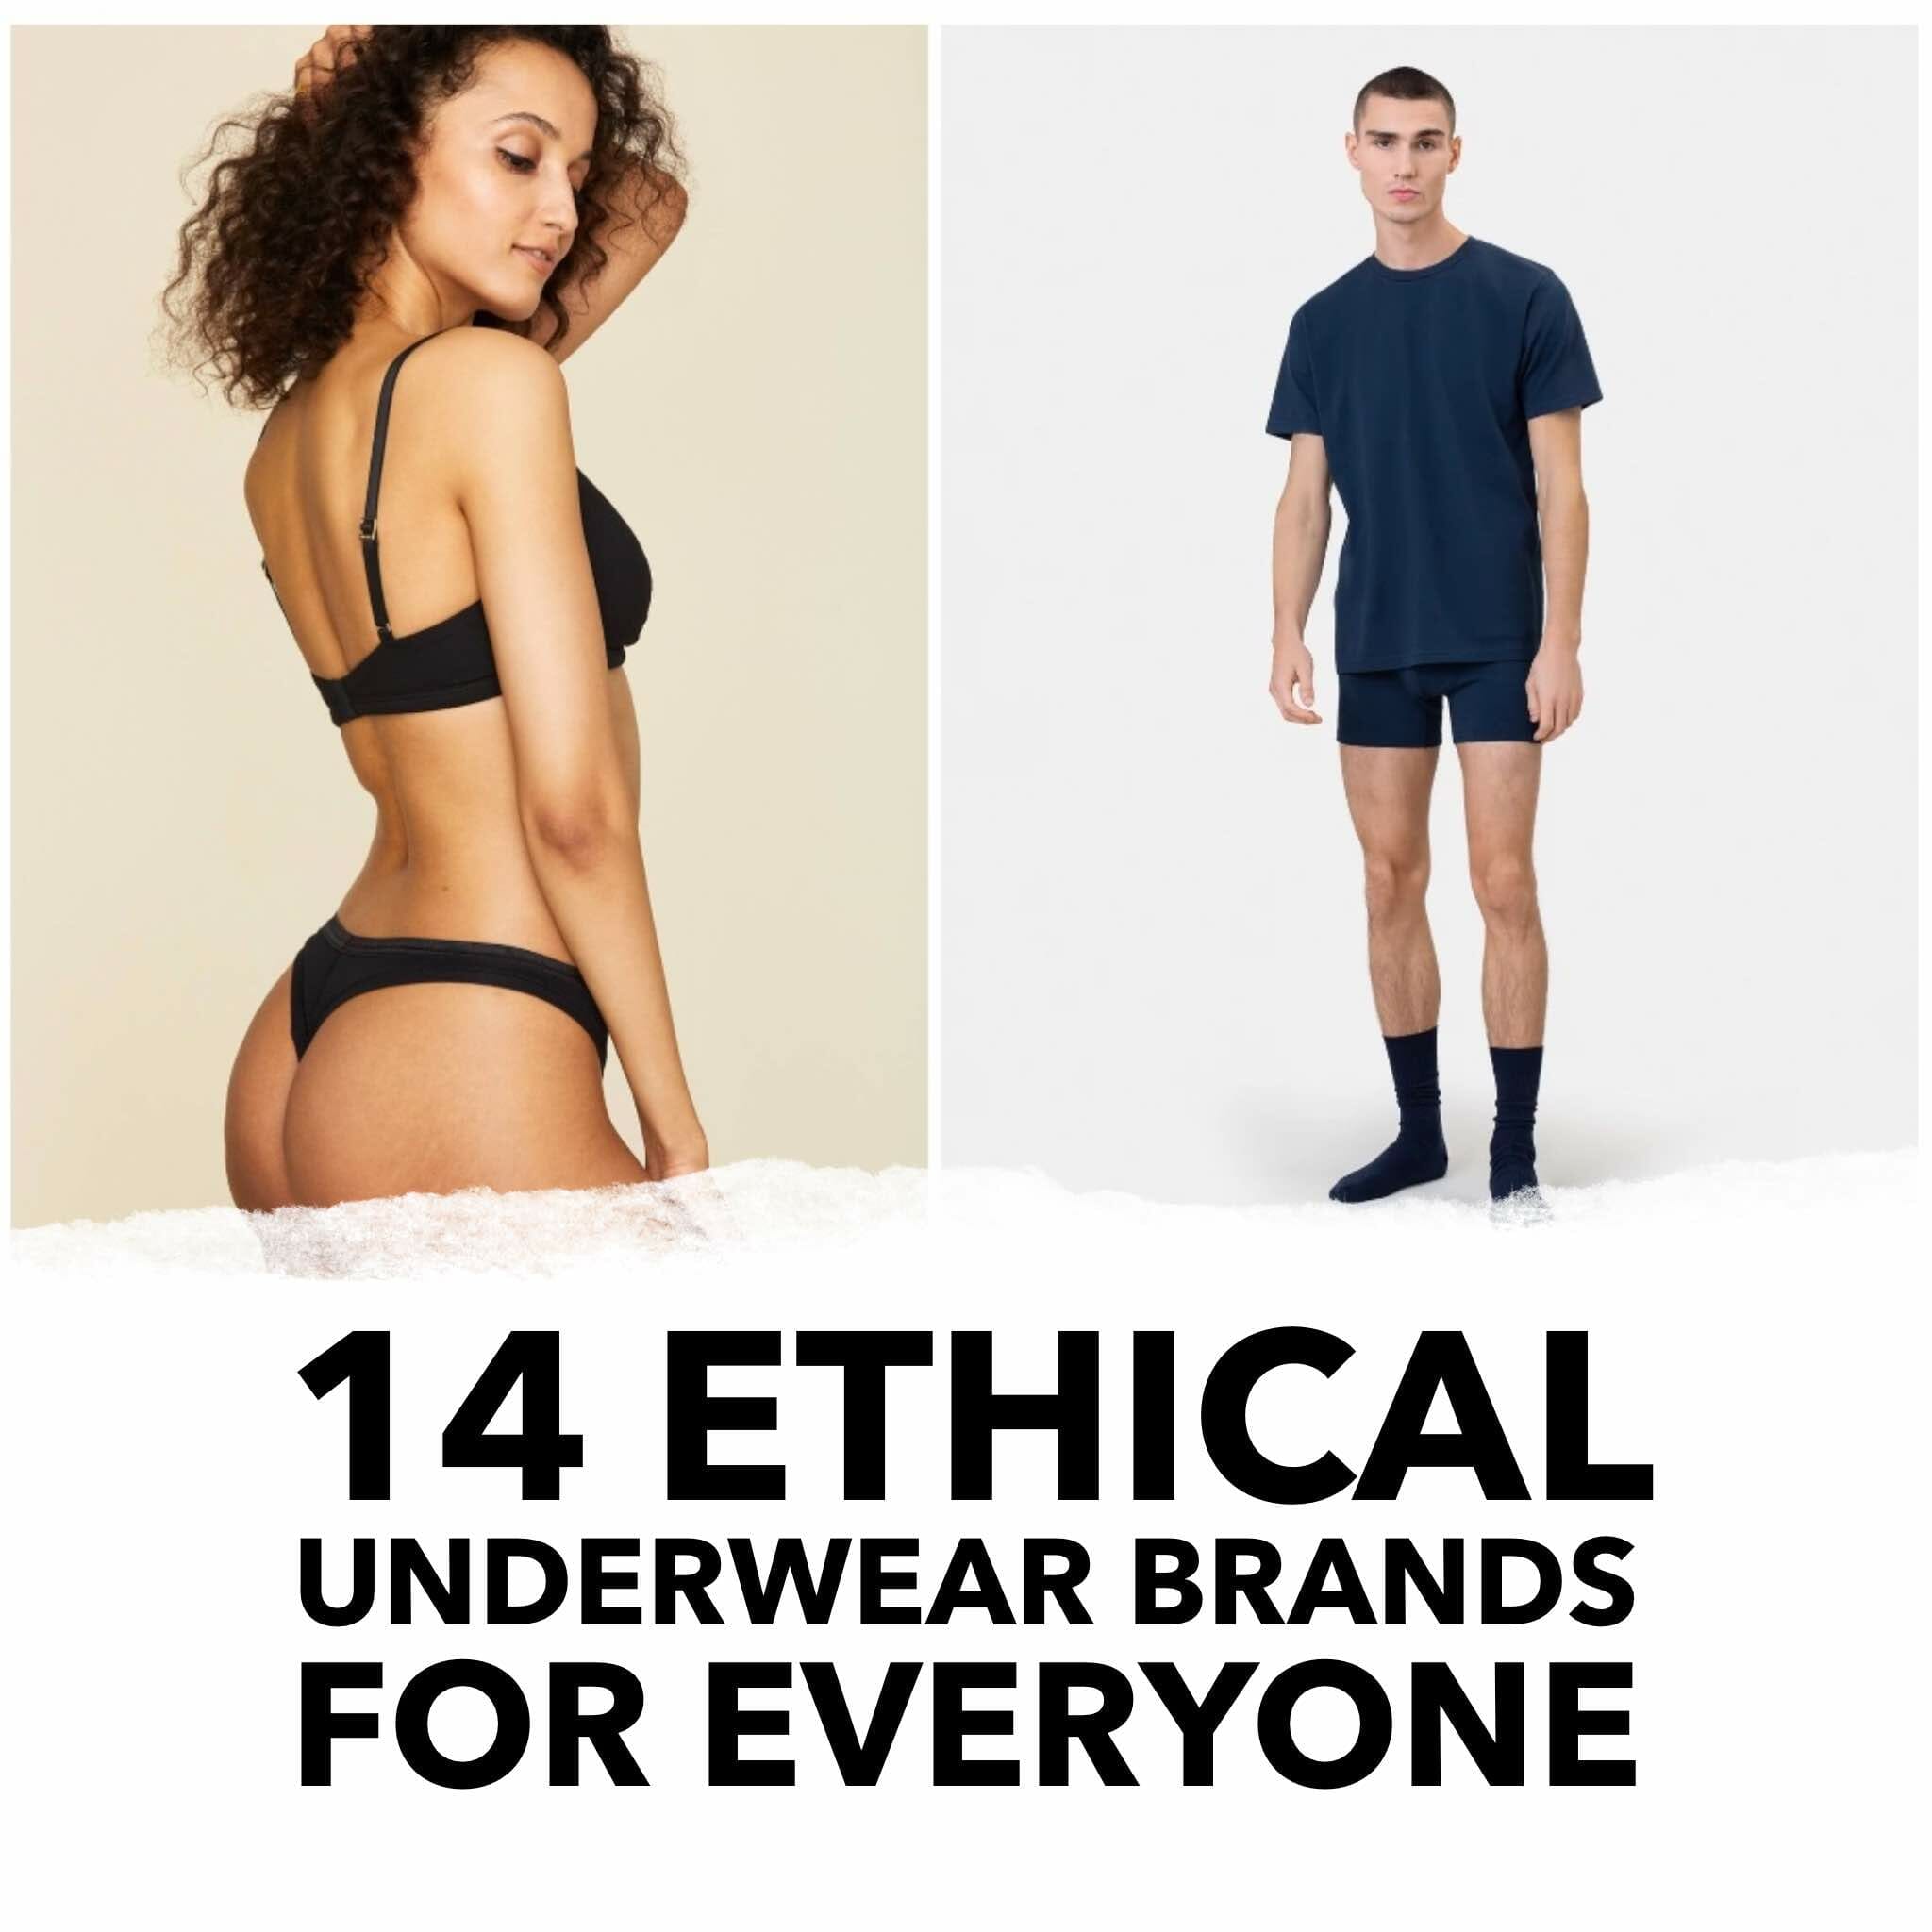 14 ethical underwear brands for him and her